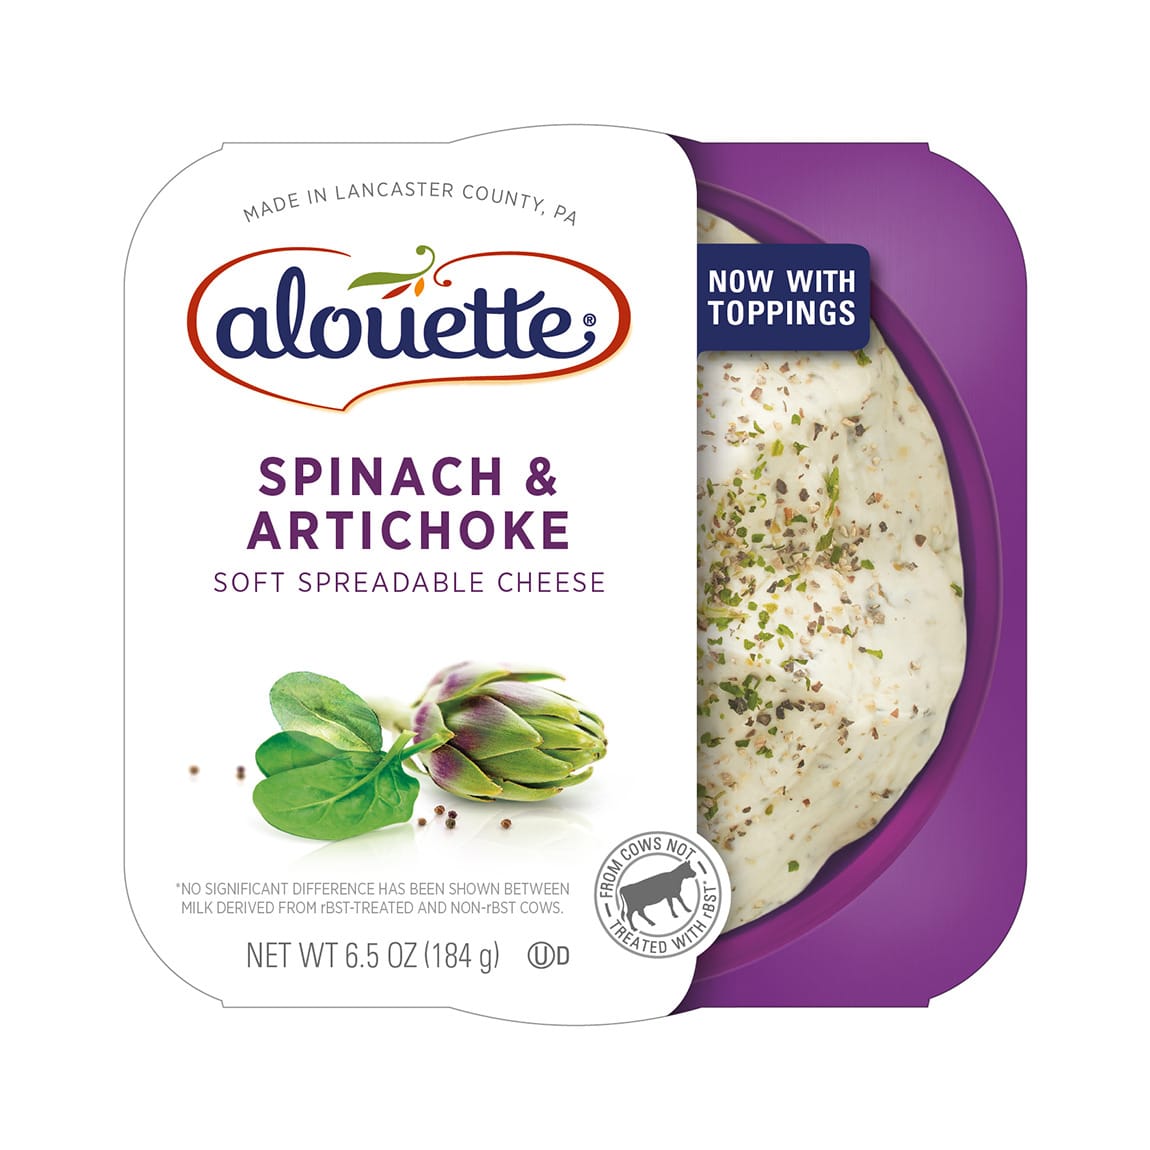 Alouette Spinach & artichoke soft spreadable cheese packaging